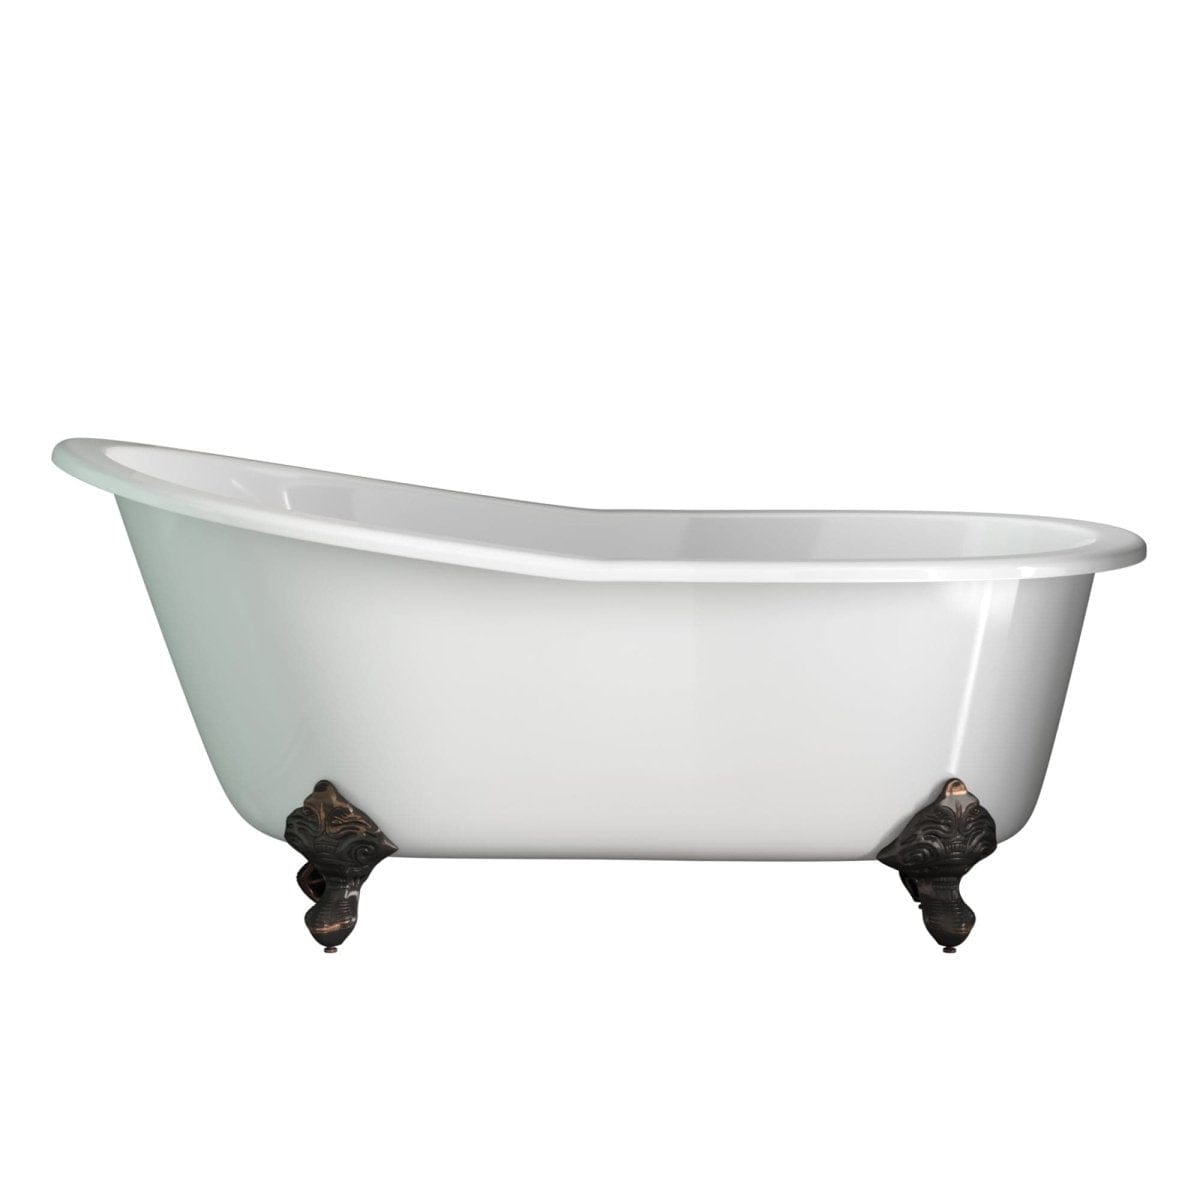 CAST IRON SLIPPER CLAWFOOT TUB - NO FAUCET DRILLINGS - Oasis Bathtubs